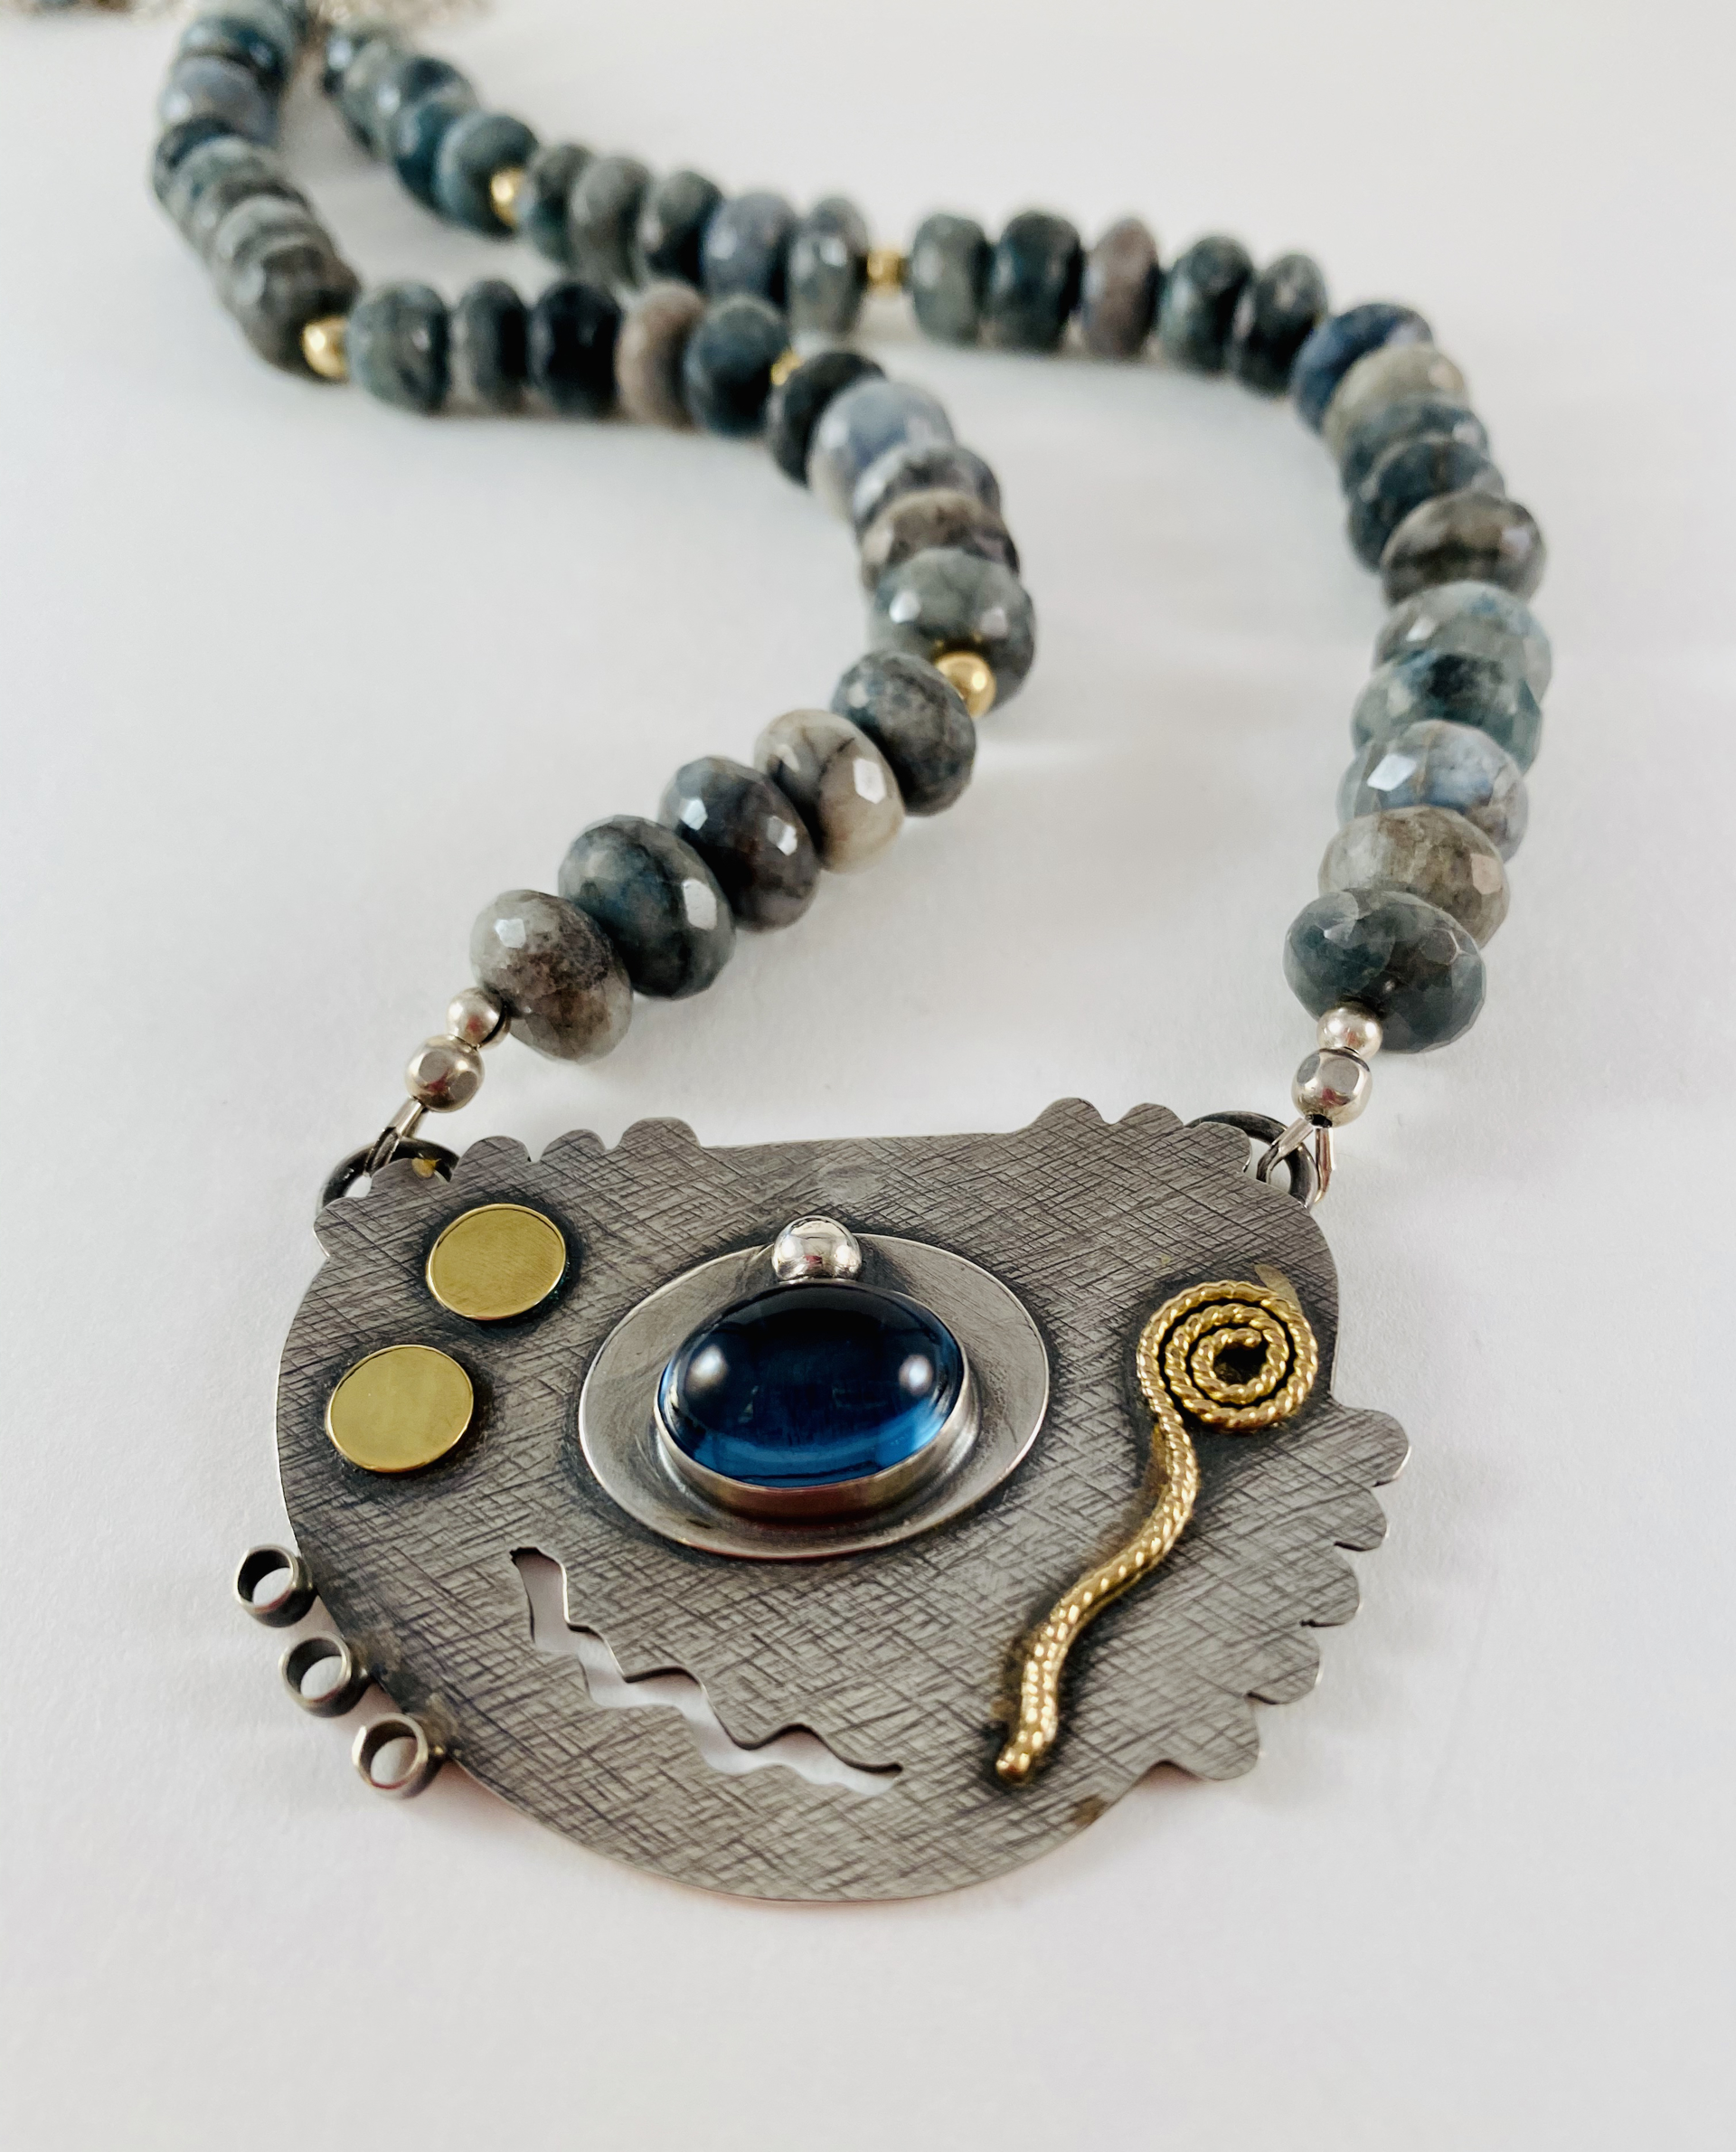 Blue Topaz Pendant with 14k,18k Gold Accents, Faceted Chrysocola 14k Bead Necklace AB19-32 by Anne Bivens